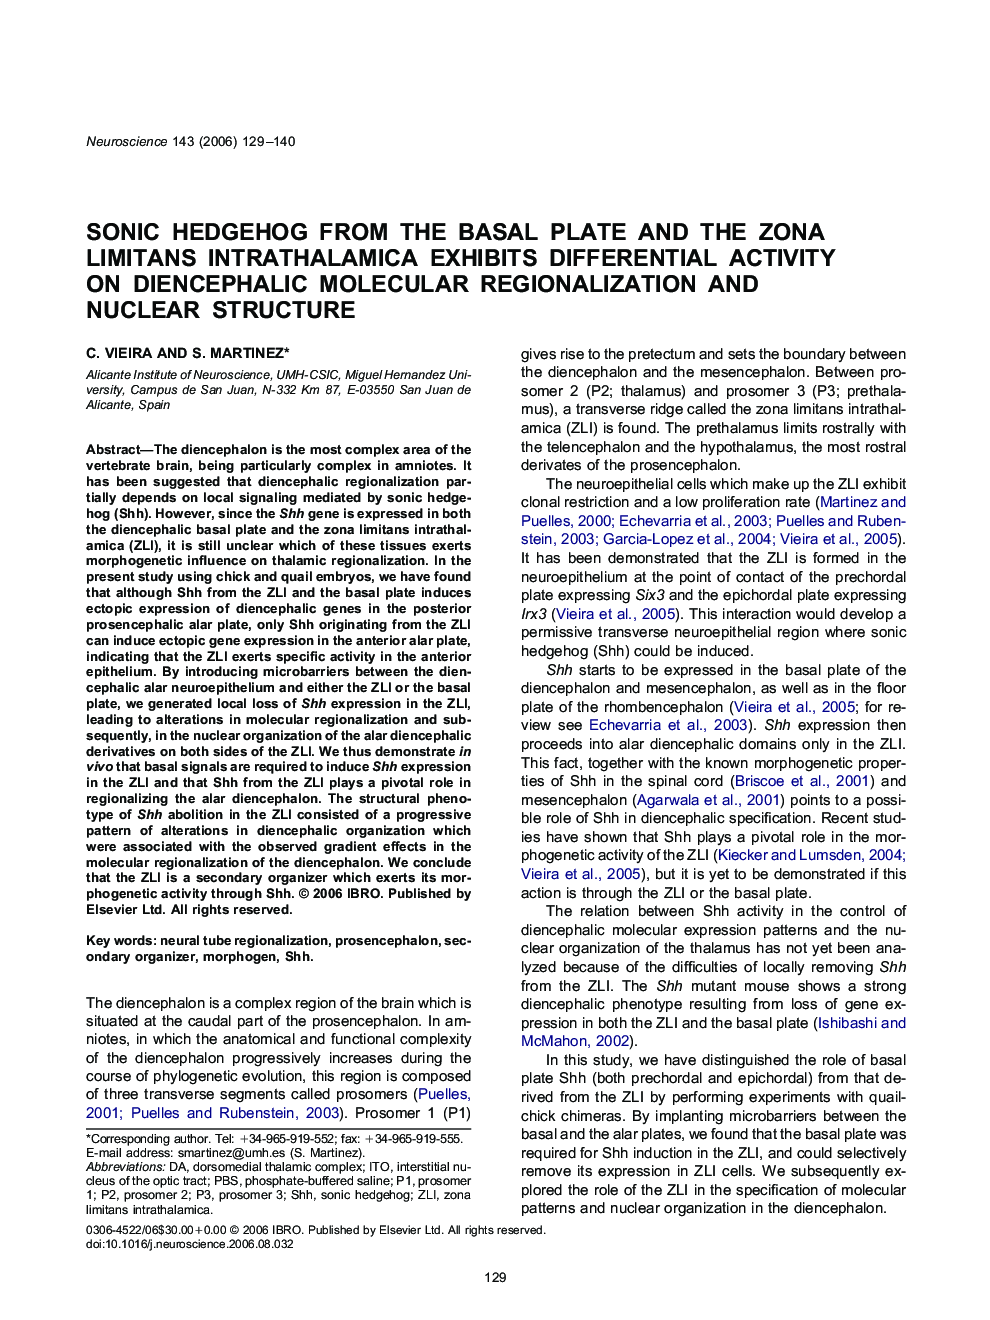 Sonic hedgehog from the basal plate and the zona limitans intrathalamica exhibits differential activity on diencephalic molecular regionalization and nuclear structure